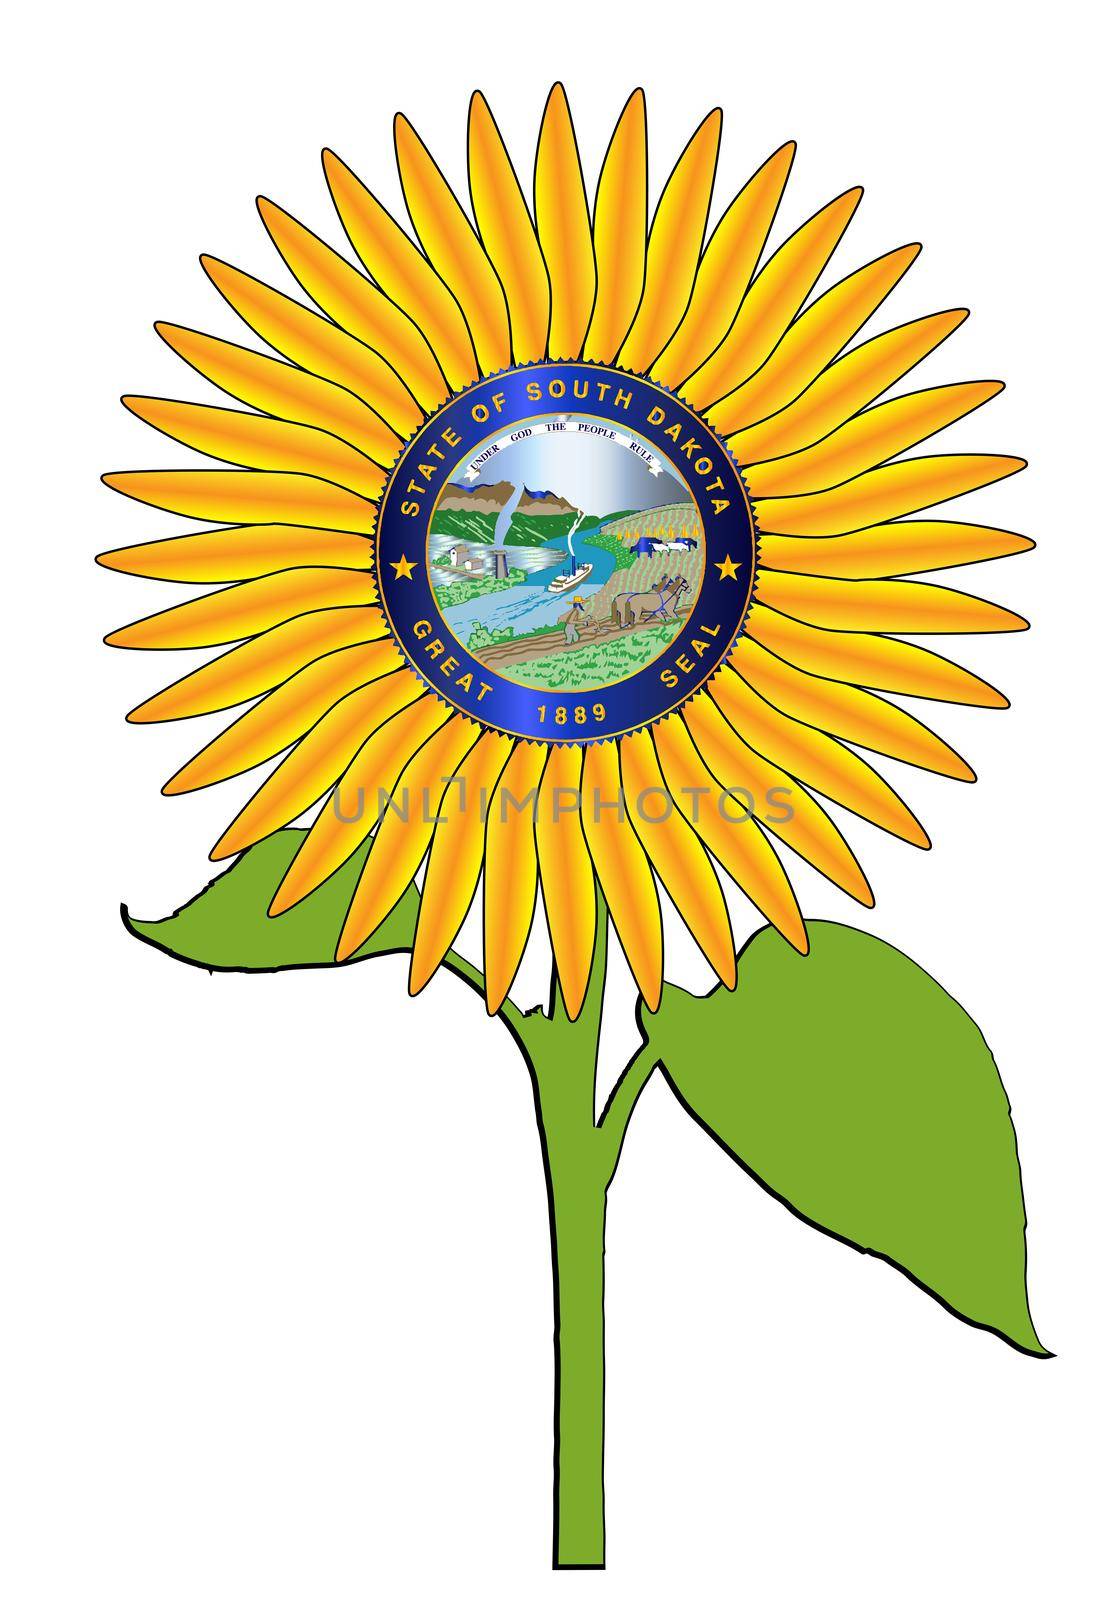 The head of a large sunflower plant isolated on a white background with the seal of the USA state of South Dakota a major sunflower growing state